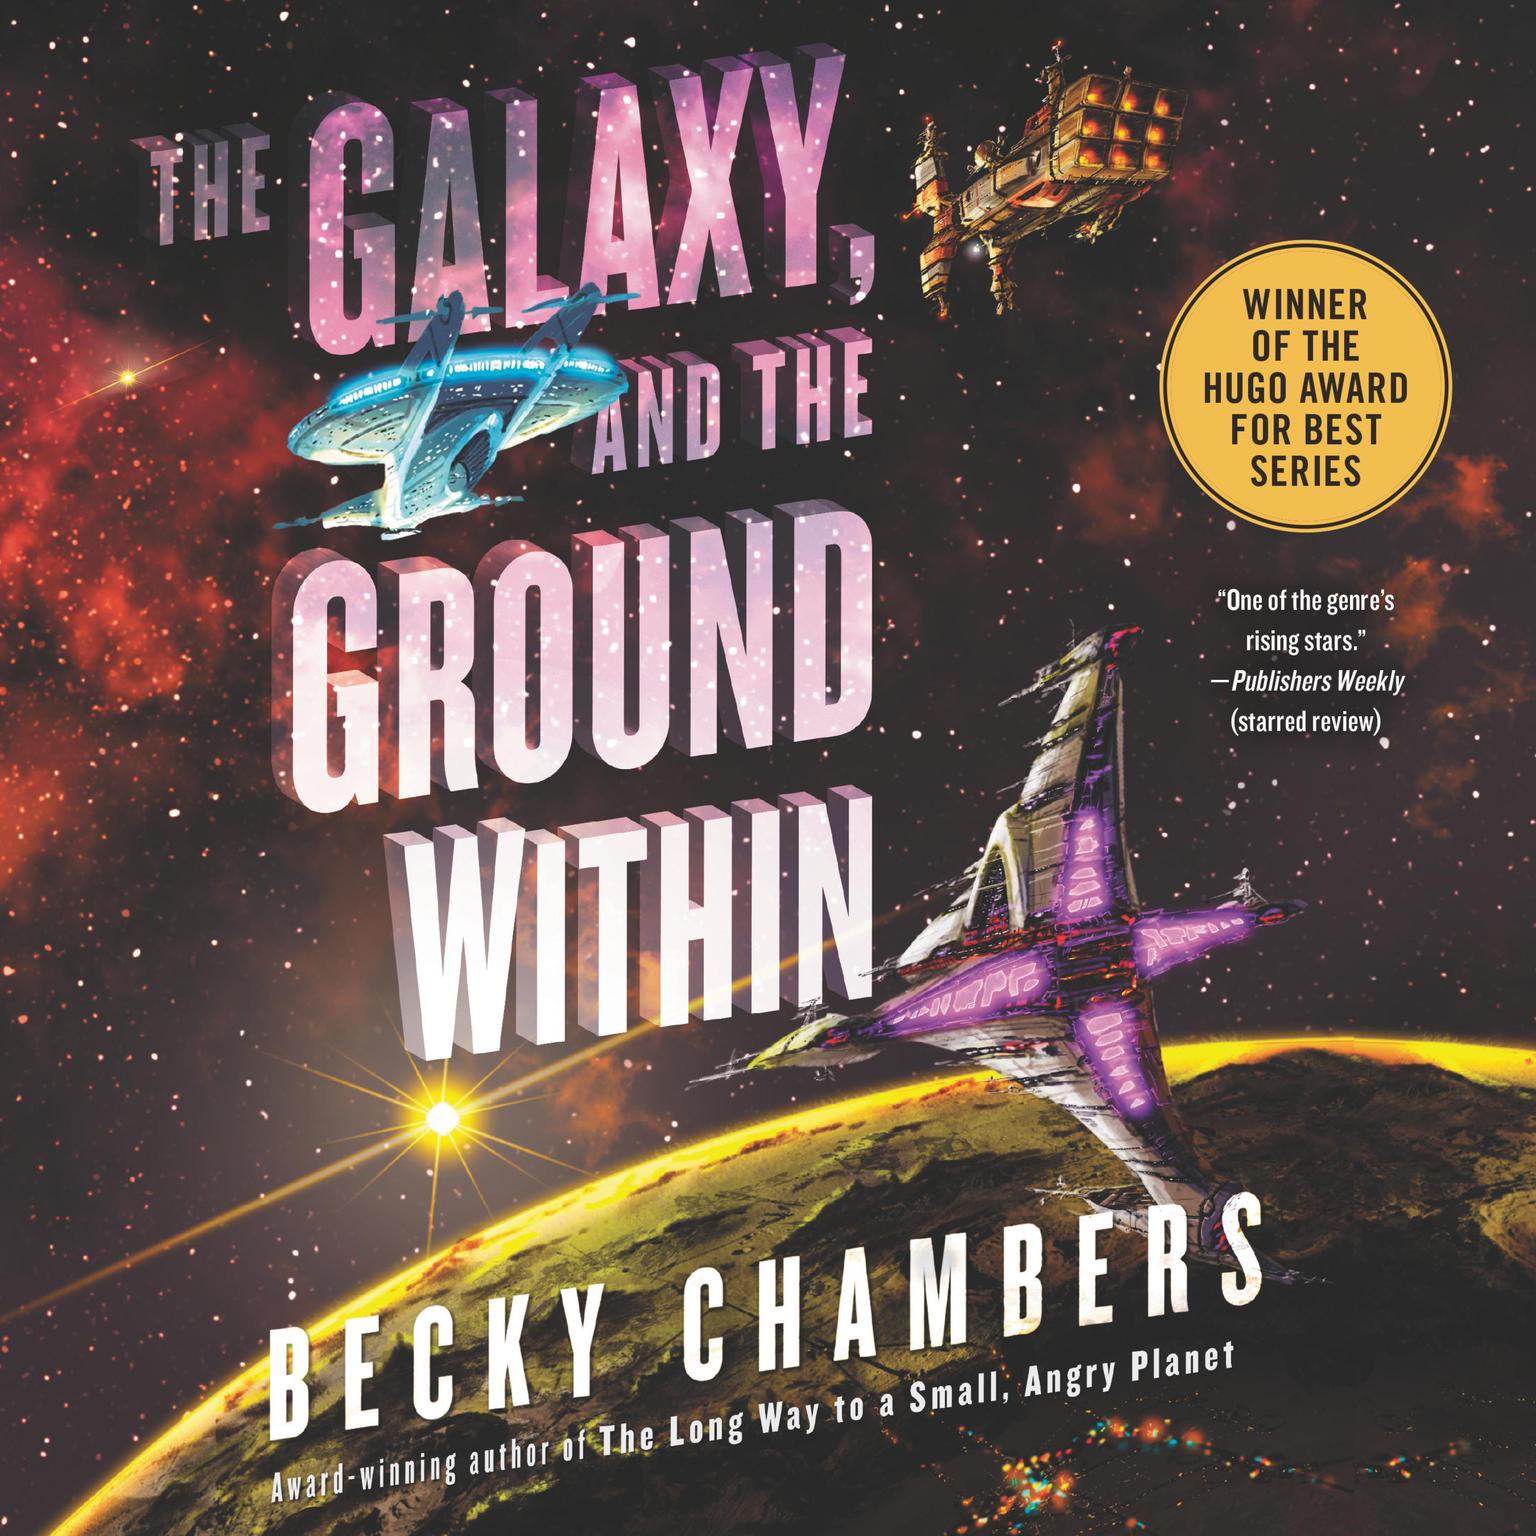 The Galaxy, and the Ground Within (EBook, 2021, Hodder & Stoughton)